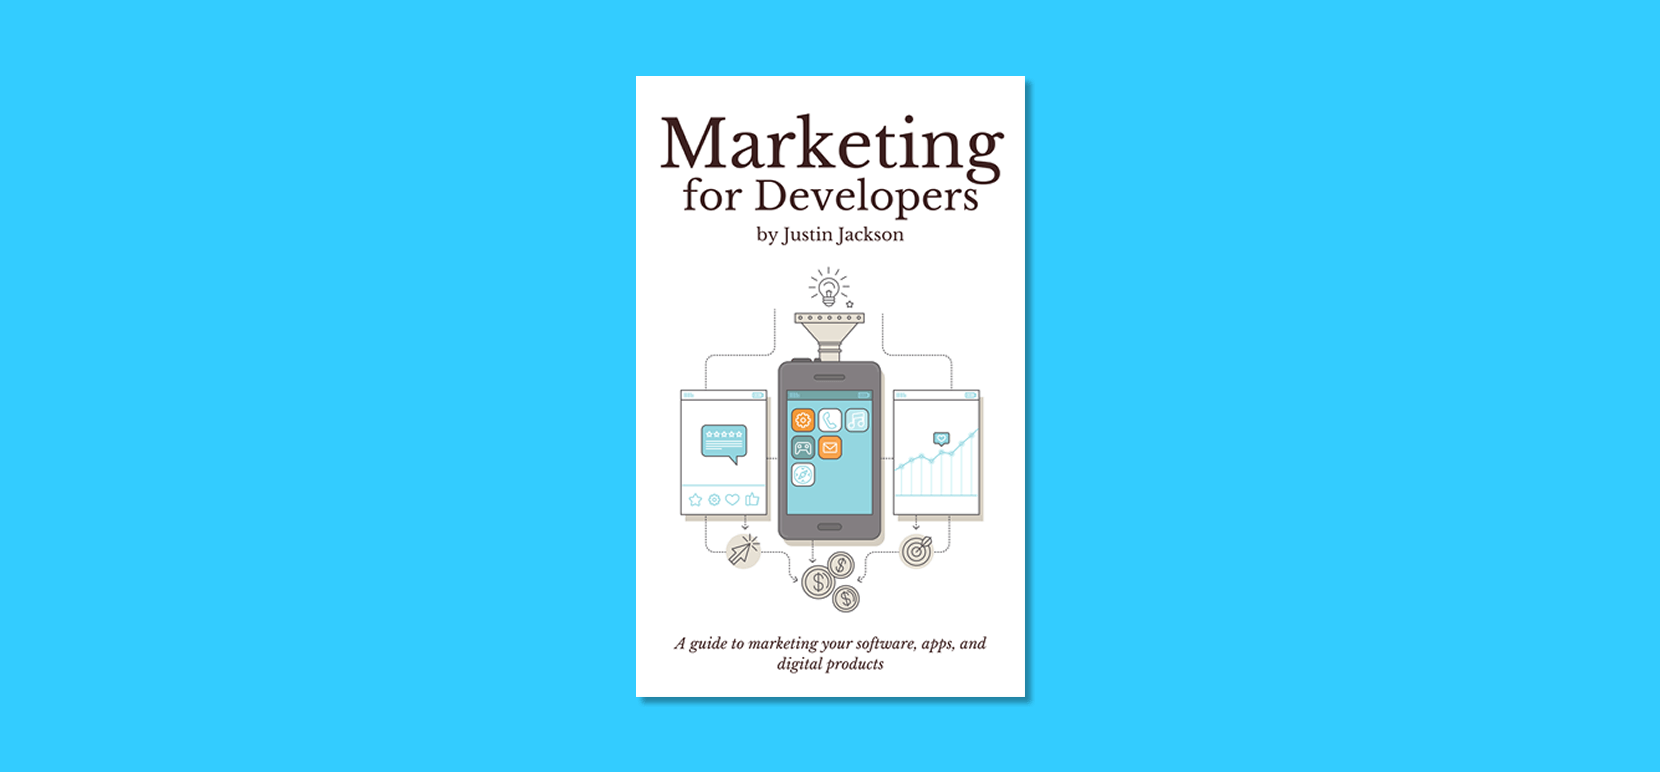 eBook: Marketing for Developers Guide – only $14!